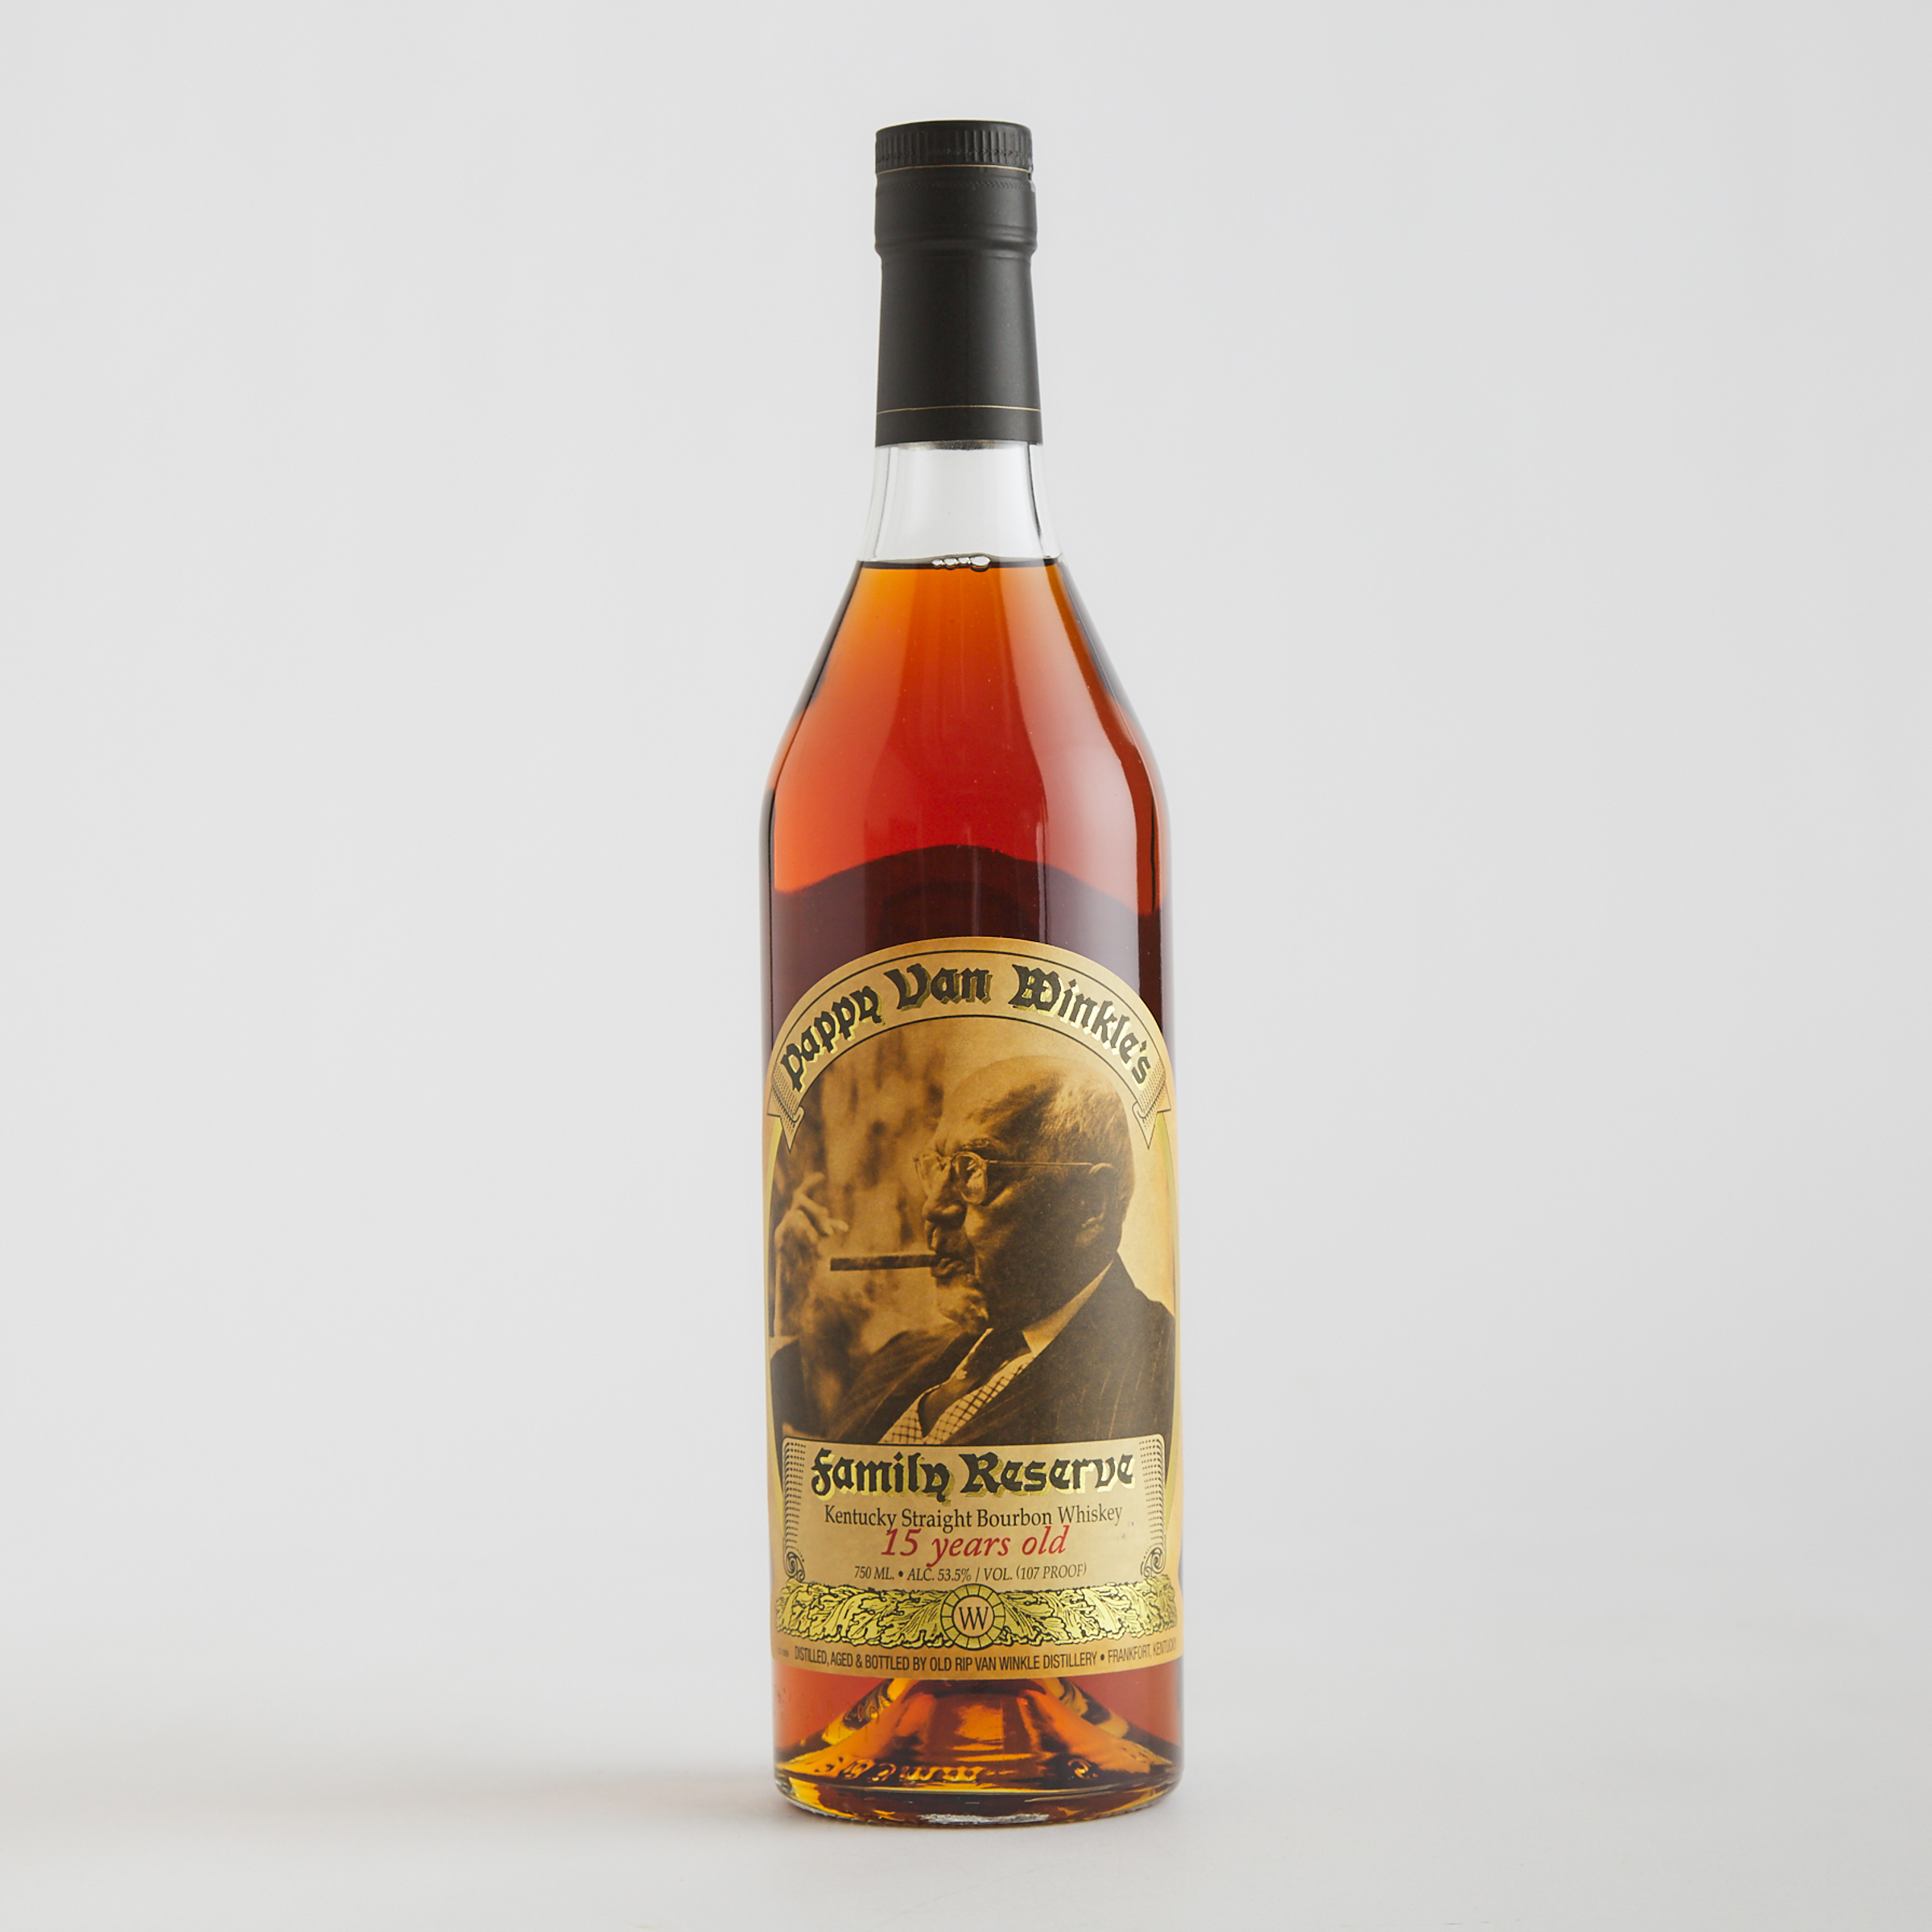 PAPPY VAN WINKLE FAMILY RESERVE KENTUCKY STRAIGHT BOURBON WHISKEY 15 YEARS (ONE 750 ML)